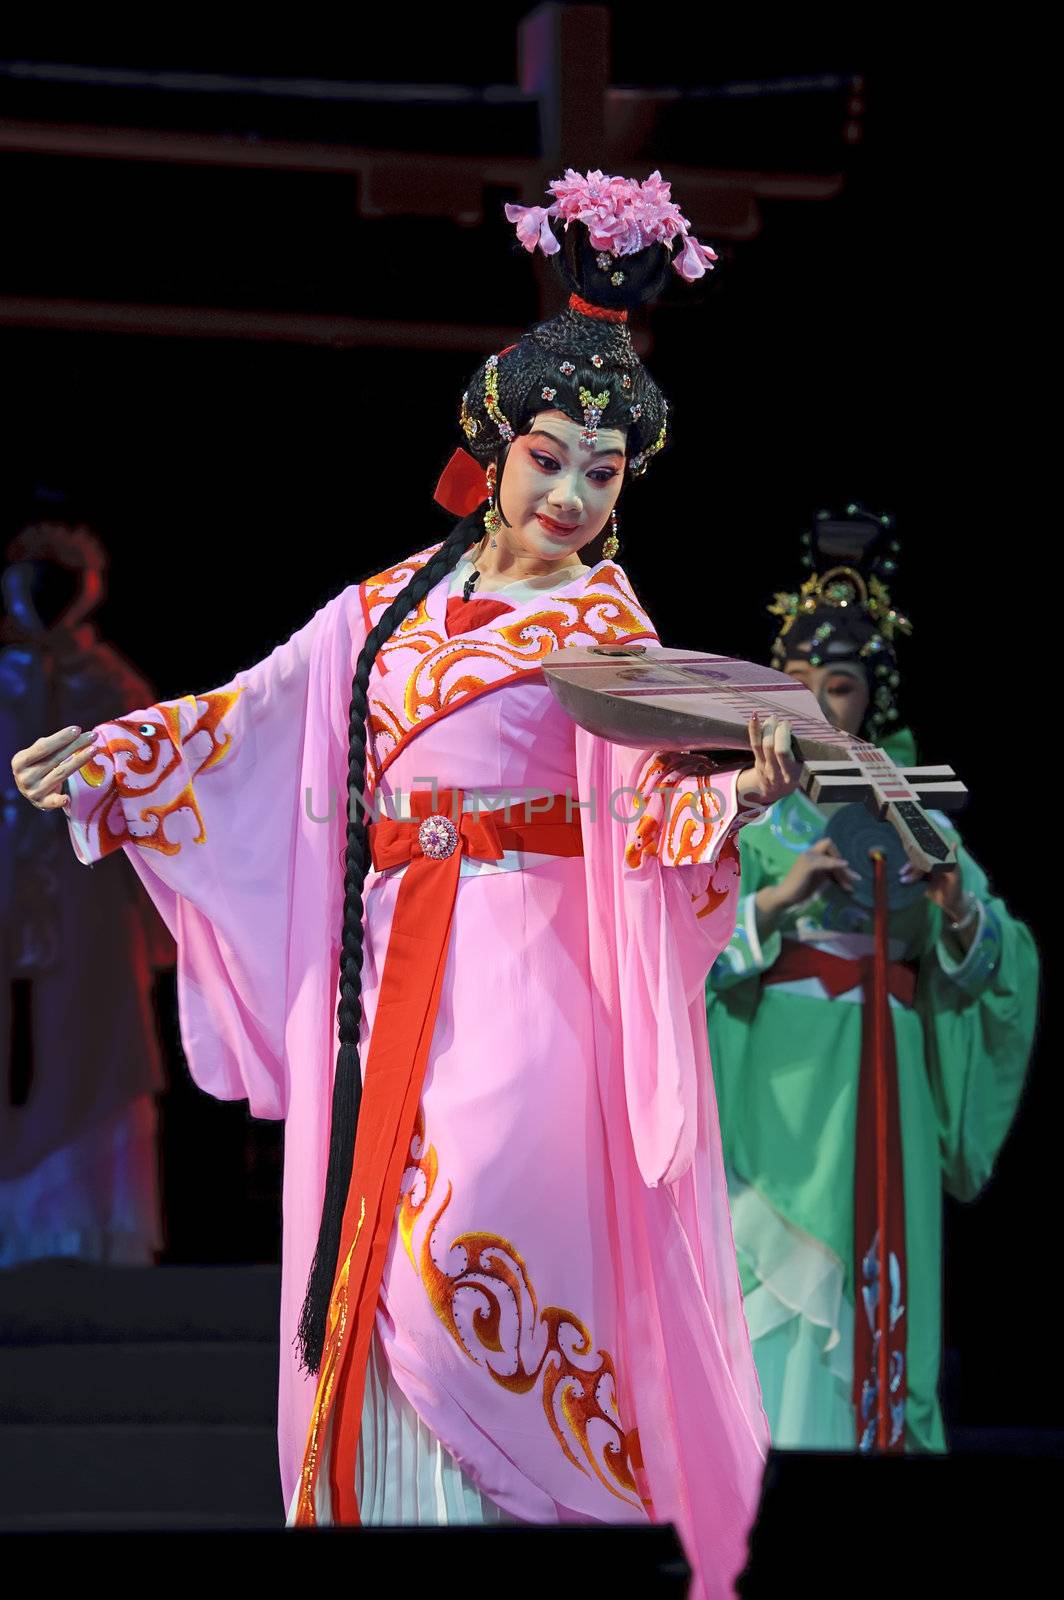 CHENGDU - JUN 6: Chinese Gaojia Opera performer make a show on stage to compete for awards in 25th Chinese Drama Plum Blossom Award competition at Jinsha theater.Jun 6, 2011 in Chengdu, China.
Chinese Drama Plum Blossom Award is the highest theatrical award in China.